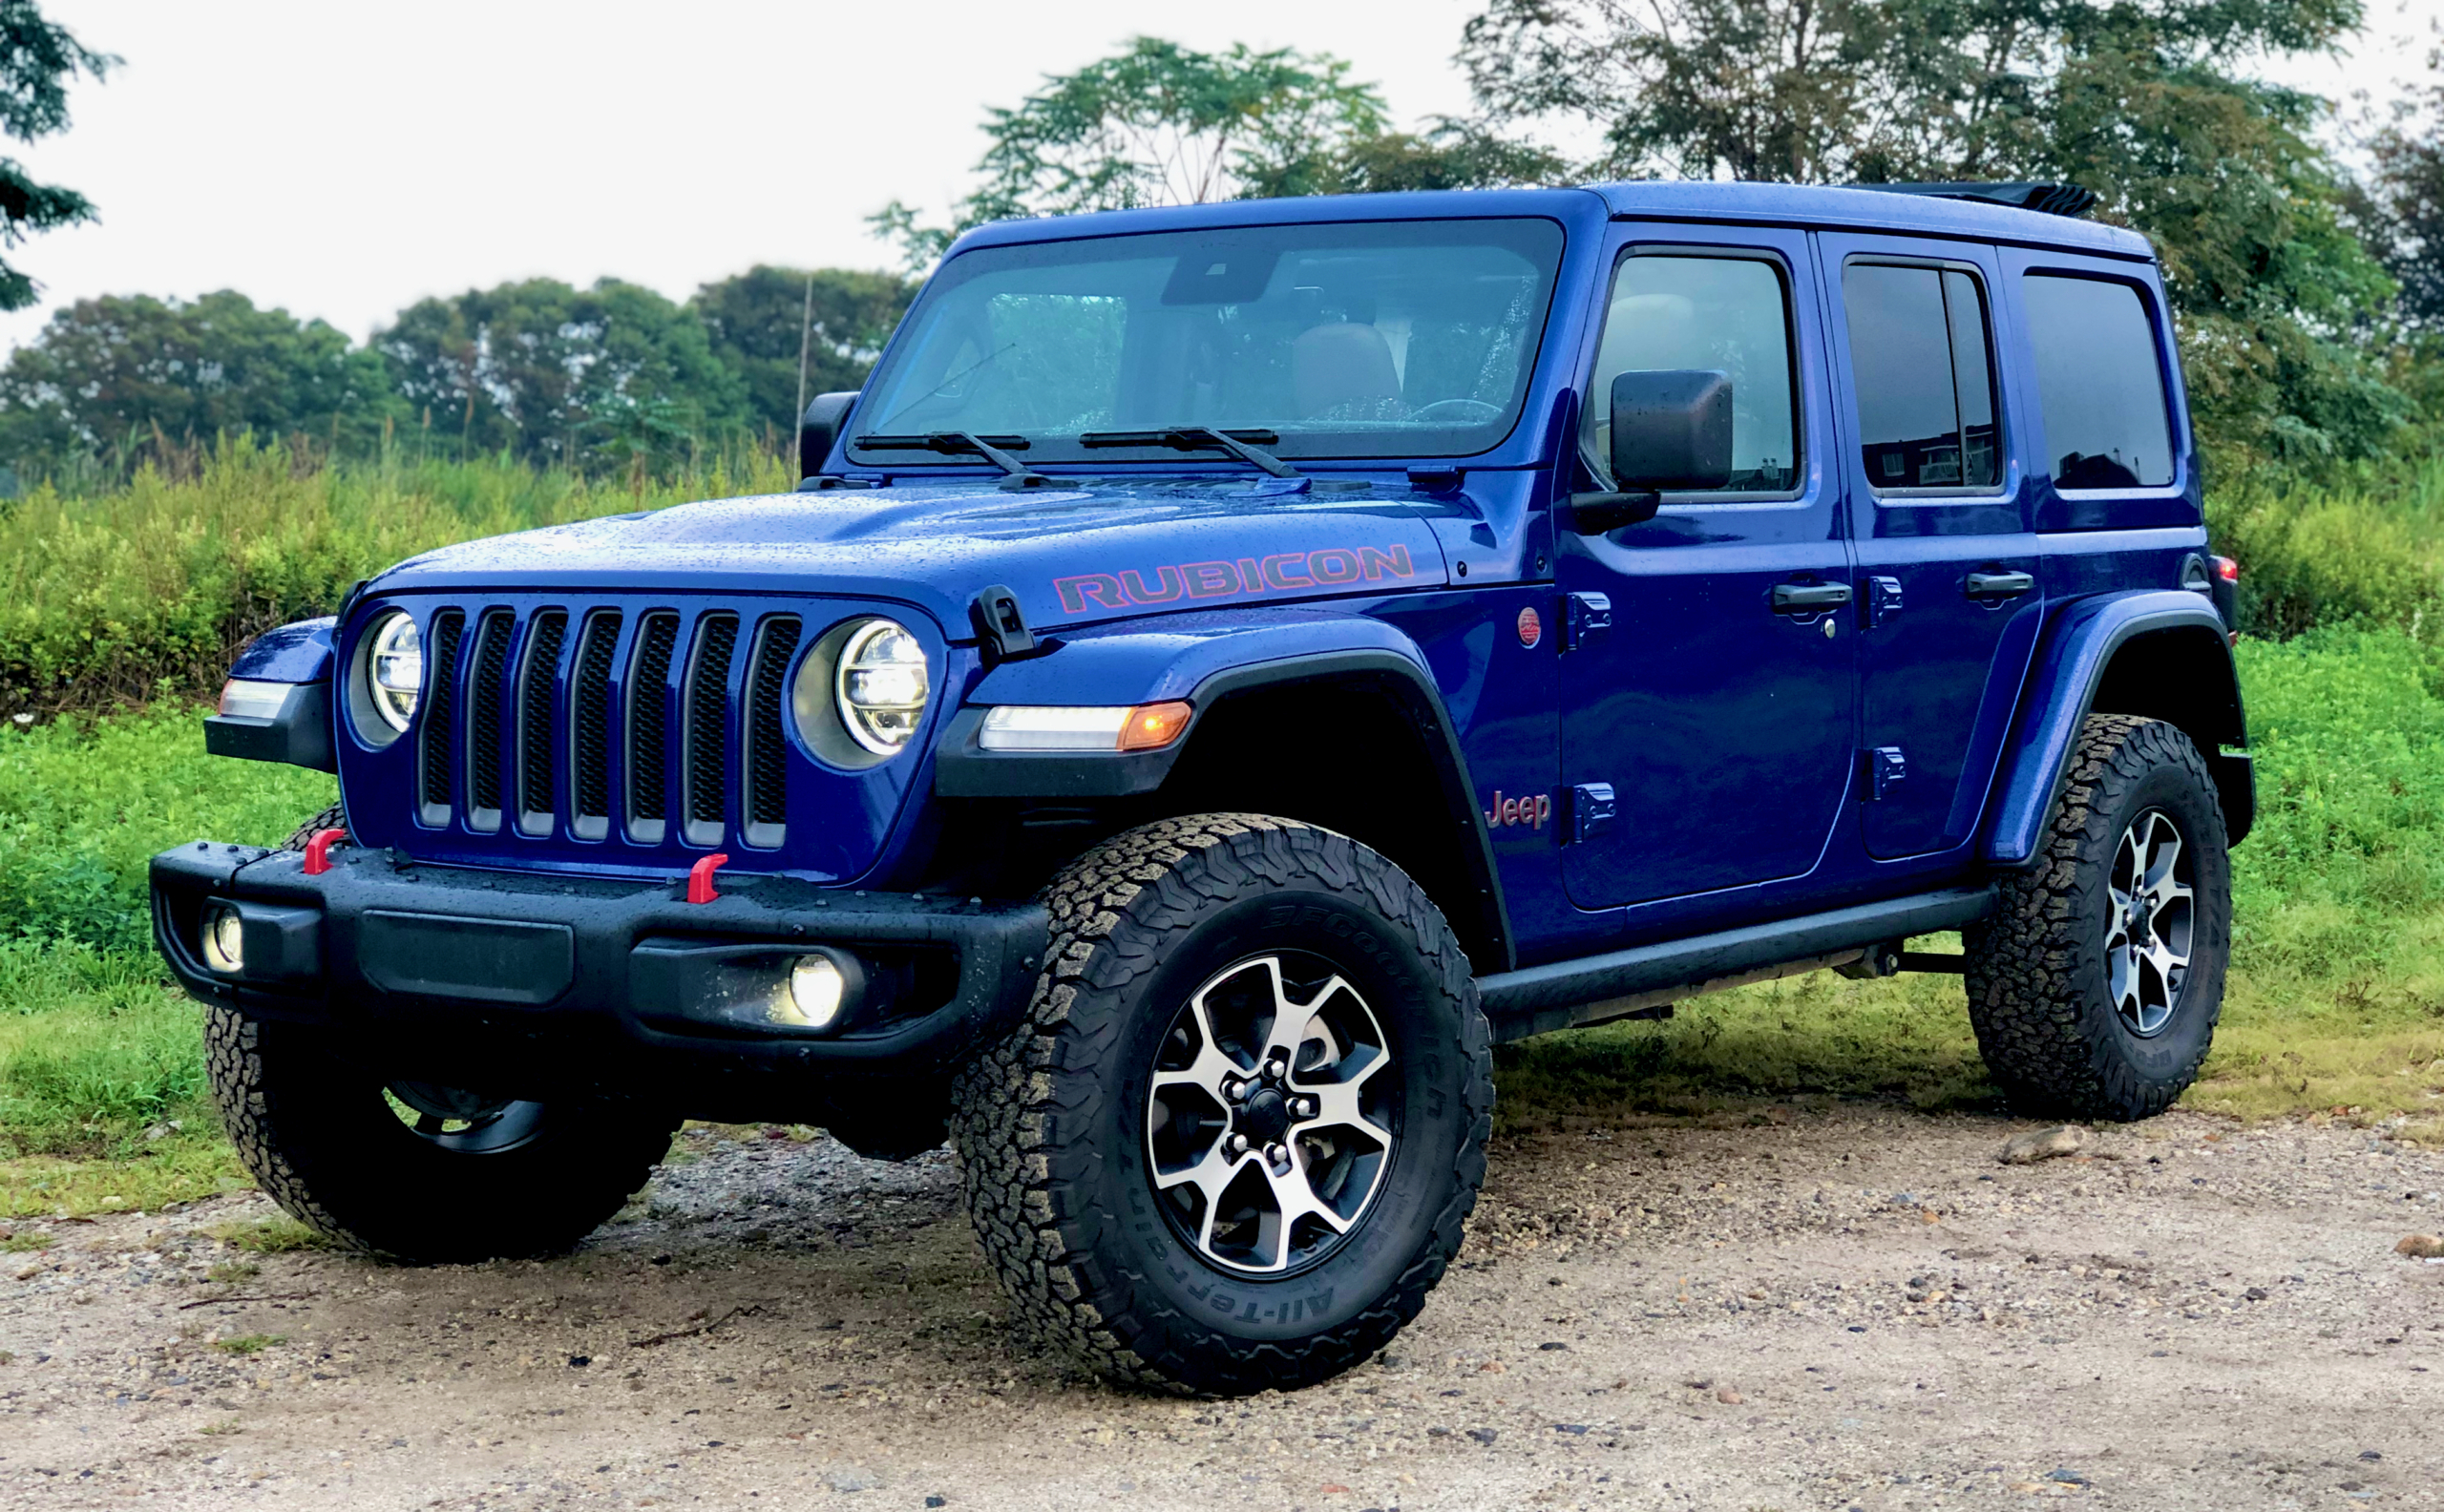 Jeep Wrangler Unlimited Rubicon Review (): Tropical Storm Isaias and  the perfect beach trip vehicle - Hooniverse